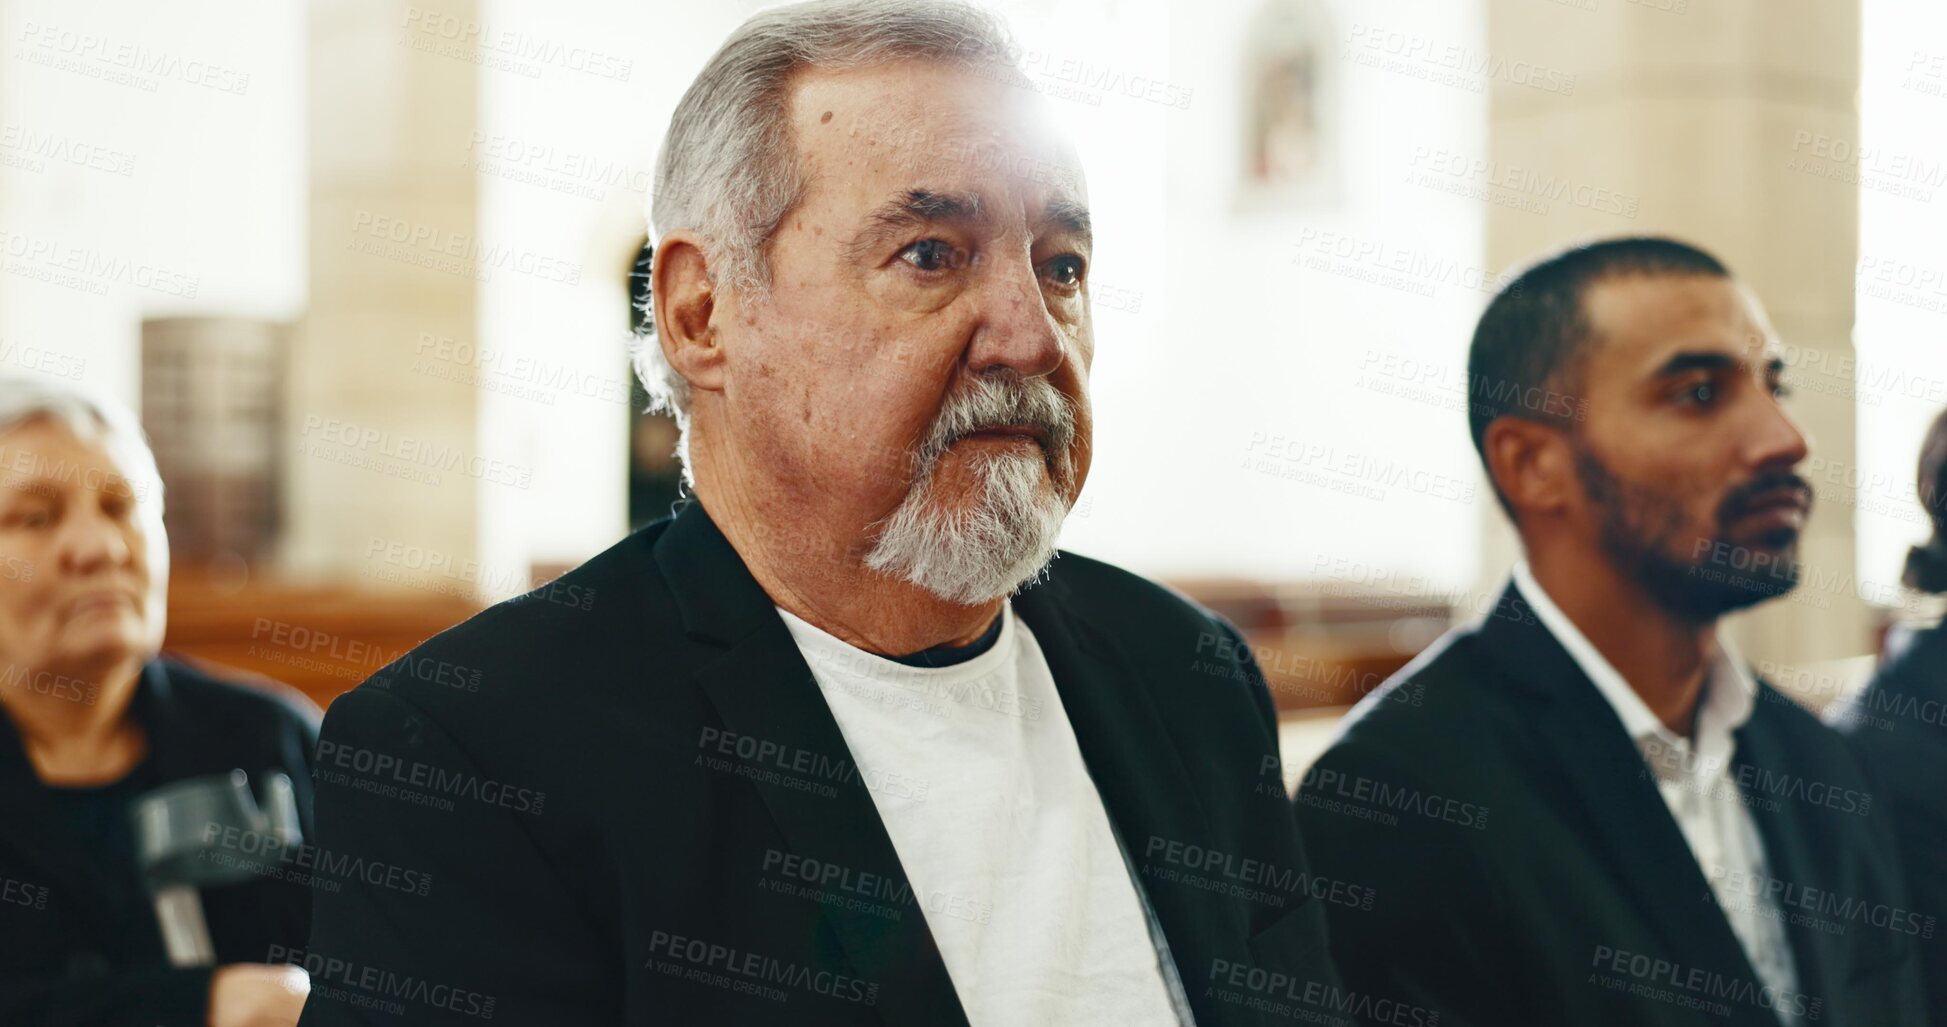 Buy stock photo Sad, bereavement and senior man at a funeral in church for religious service and mourning. Family, elderly person and burial with death, ceremony and grieving loss at a chapel event in formal suit